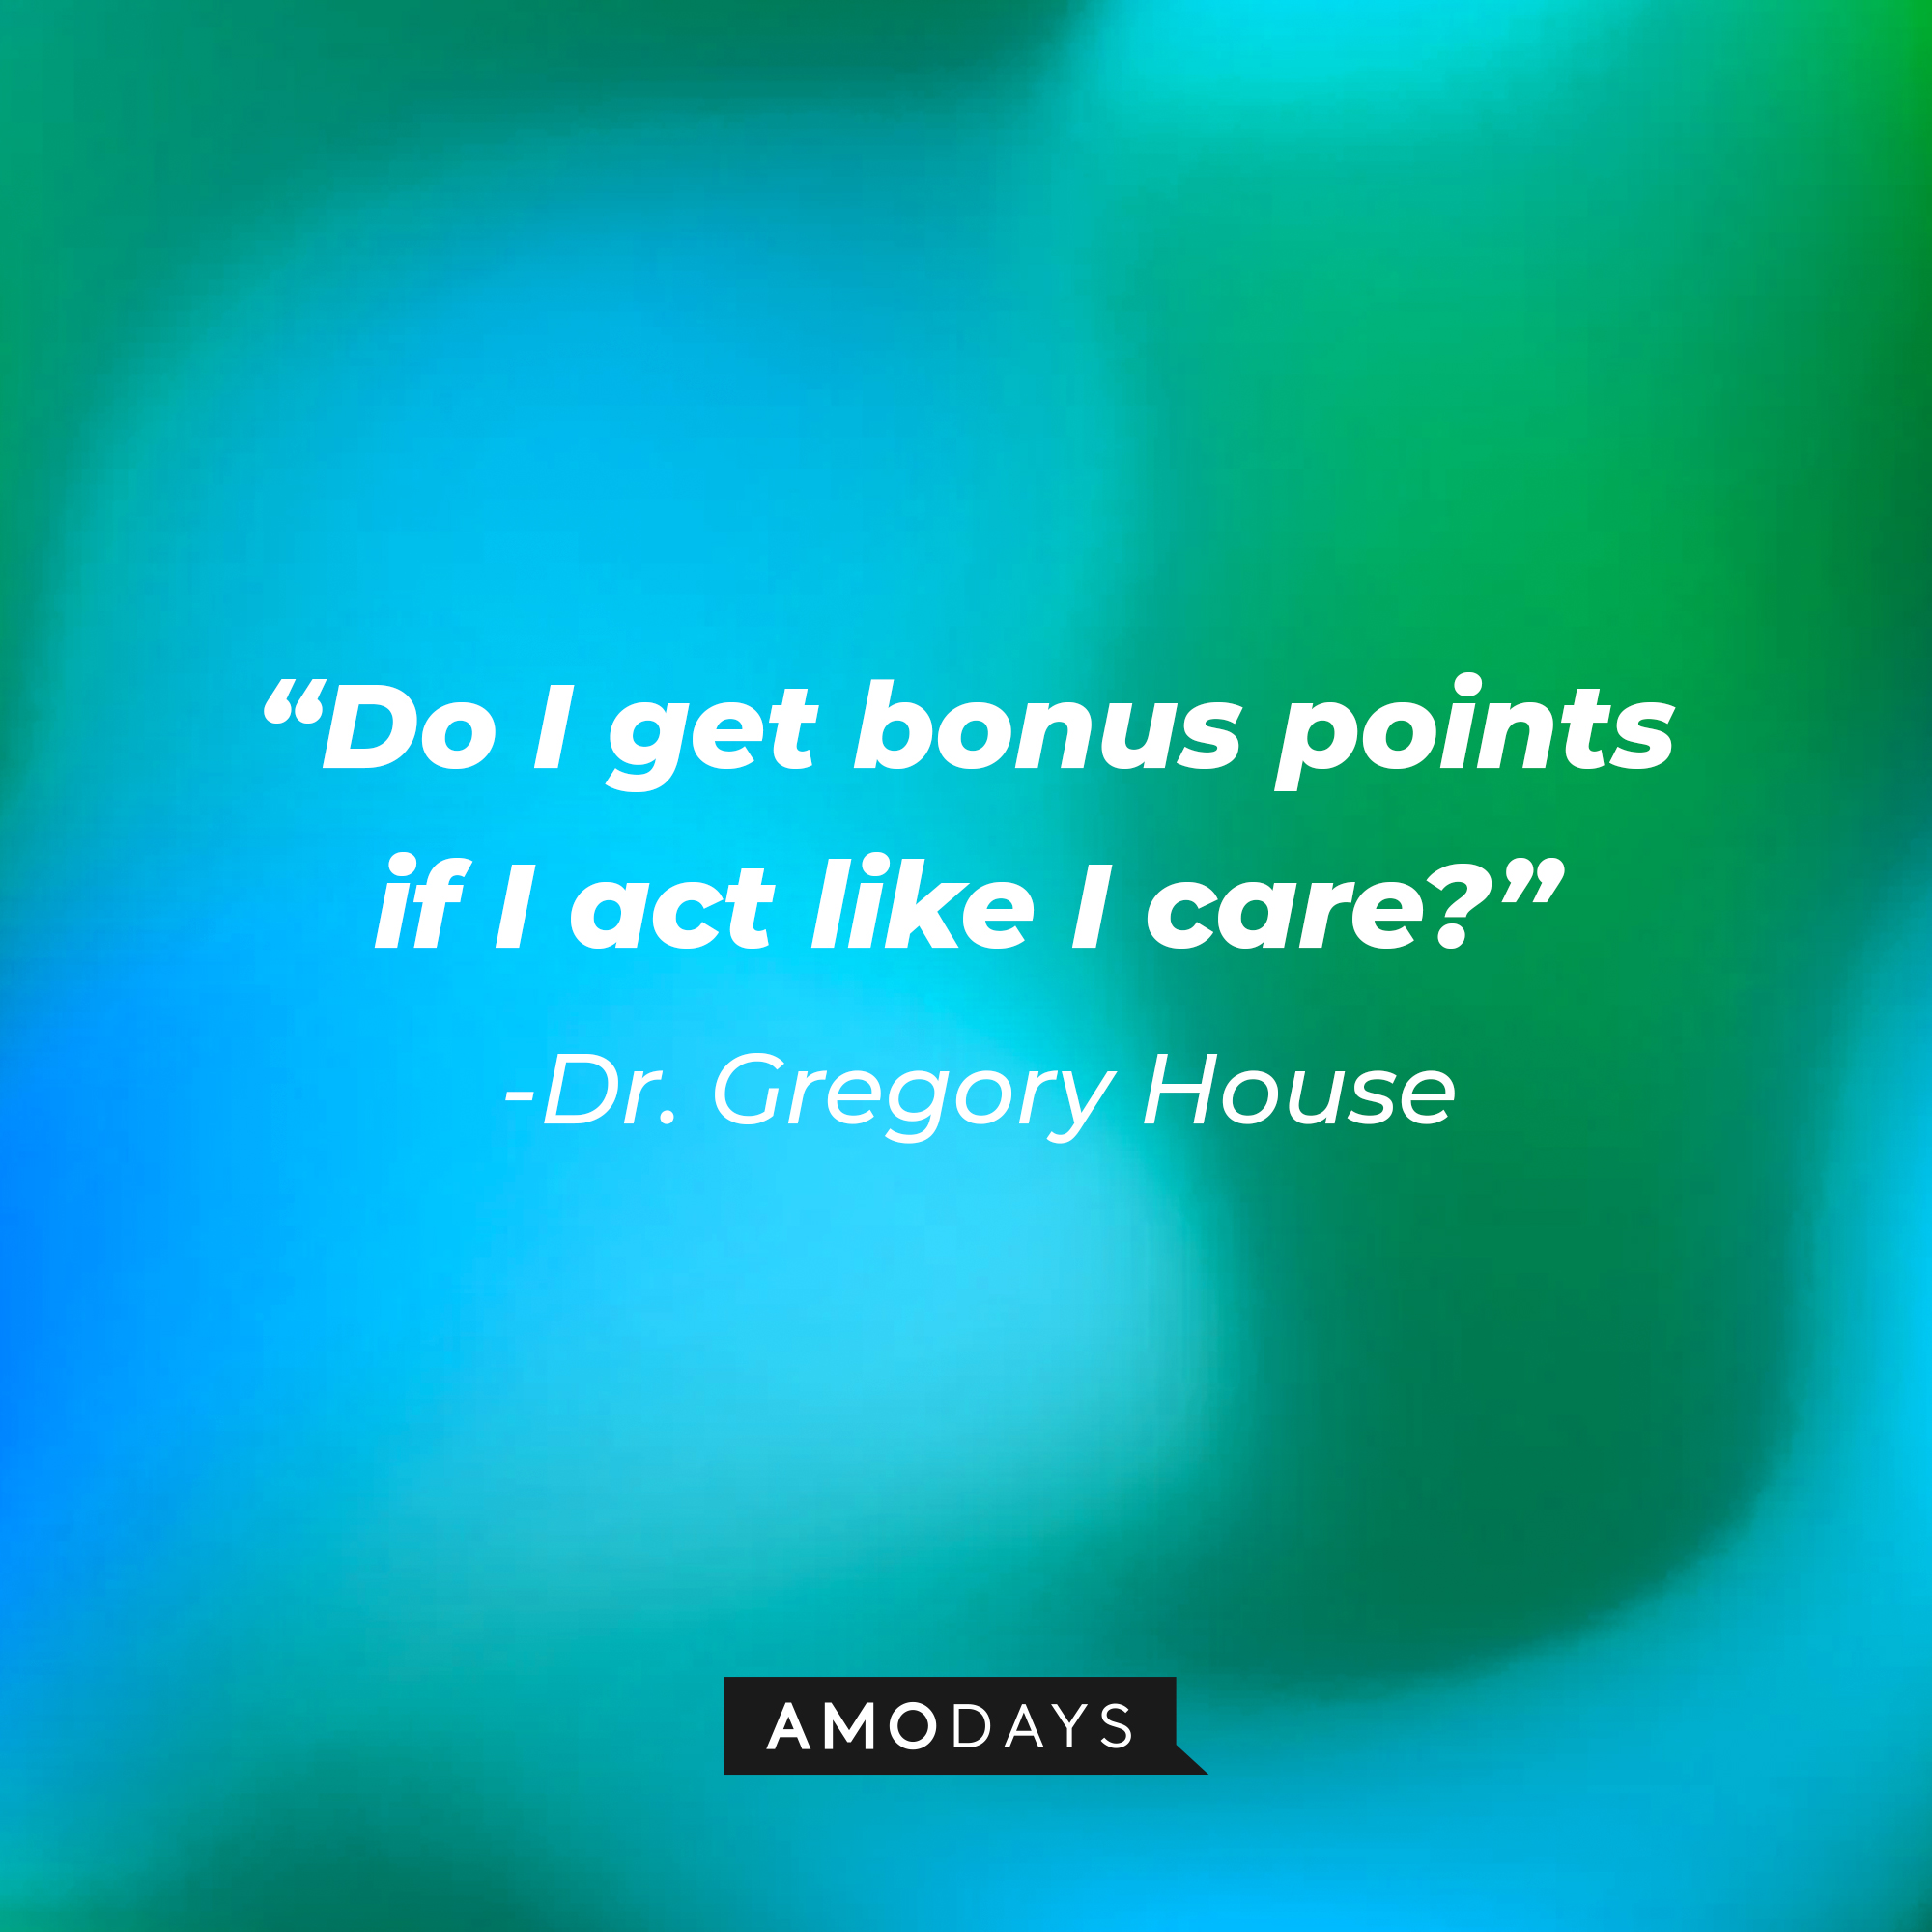 Dr. Gregory House’s quote: “Do I get bonus points if I act like I care?” | Source: AmoDays